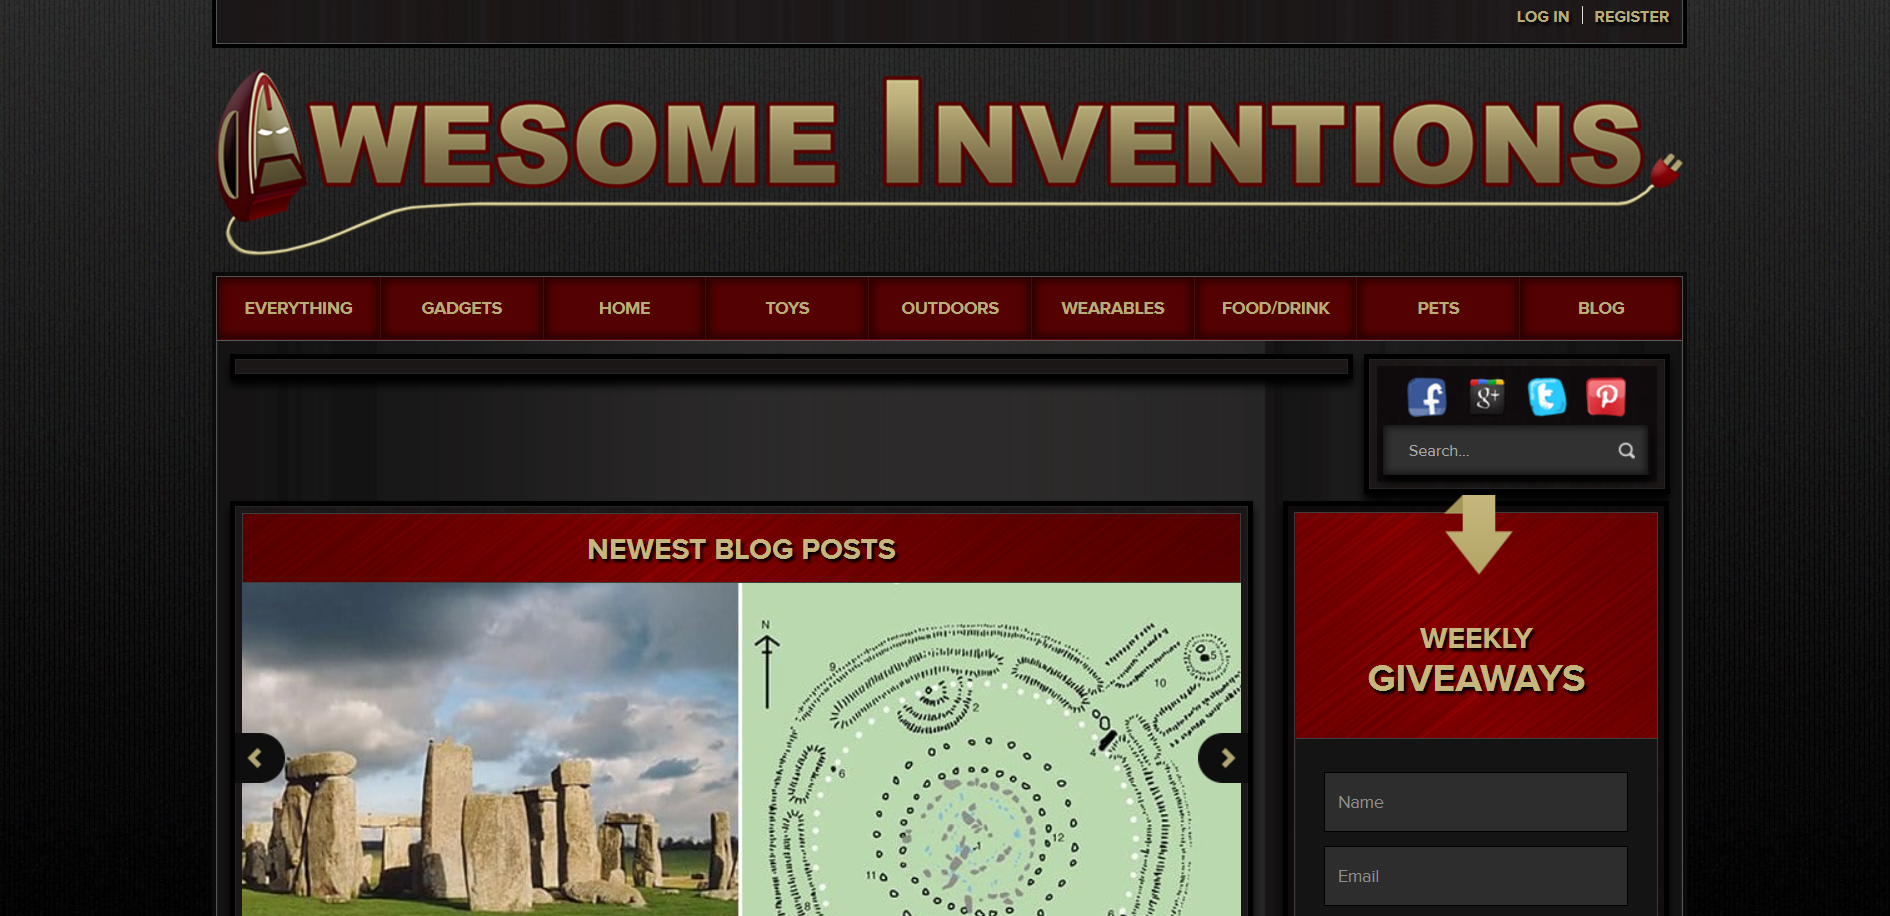 This is the screenshot Awesome Inventions website